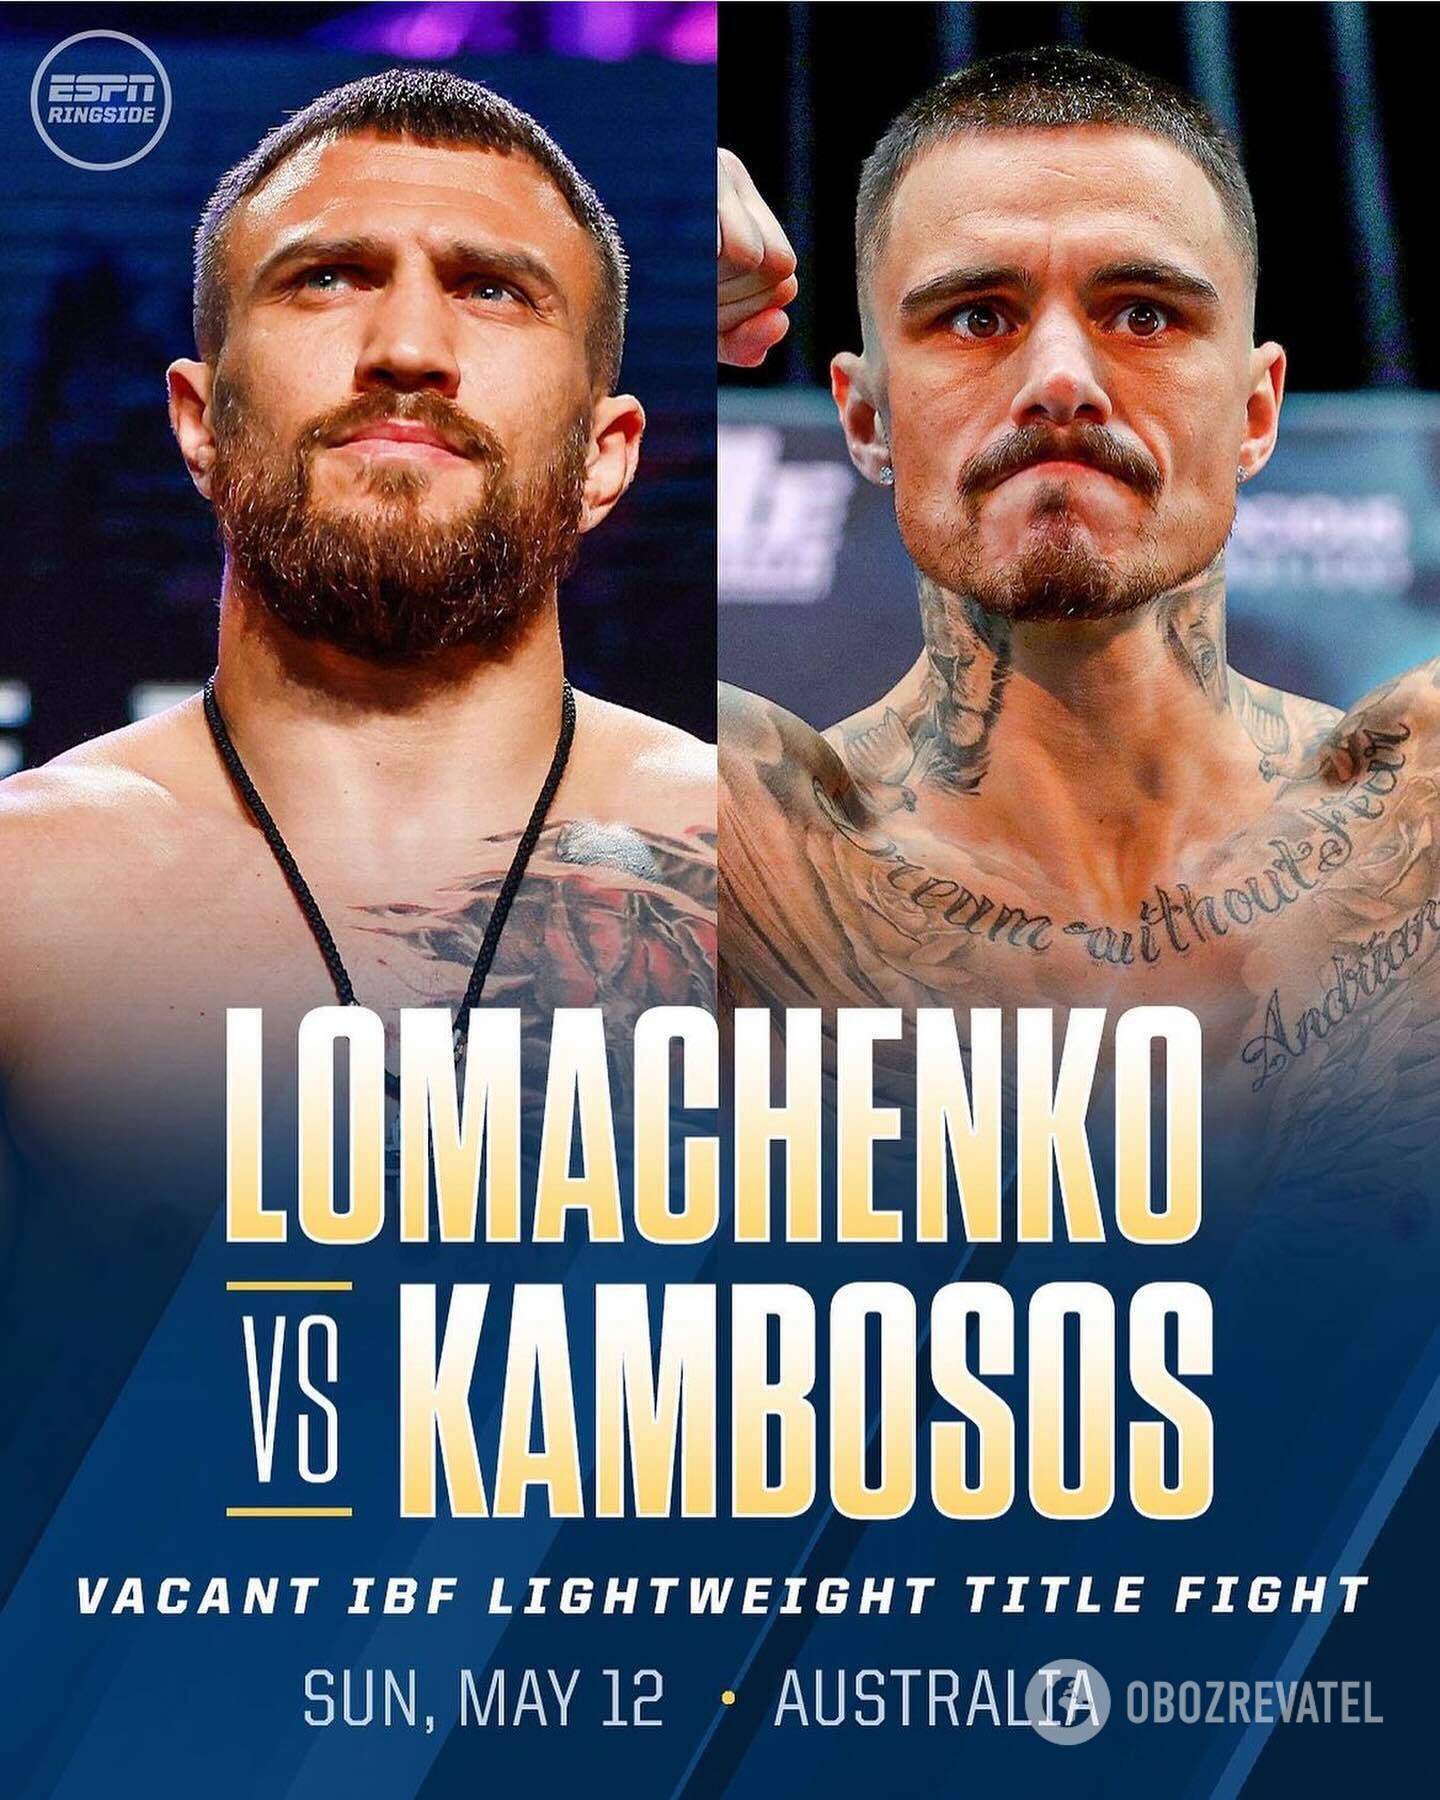 ''Not politicians or soldiers'': Kambosos prepares for fight with Lomachenko together with Russian who supports war